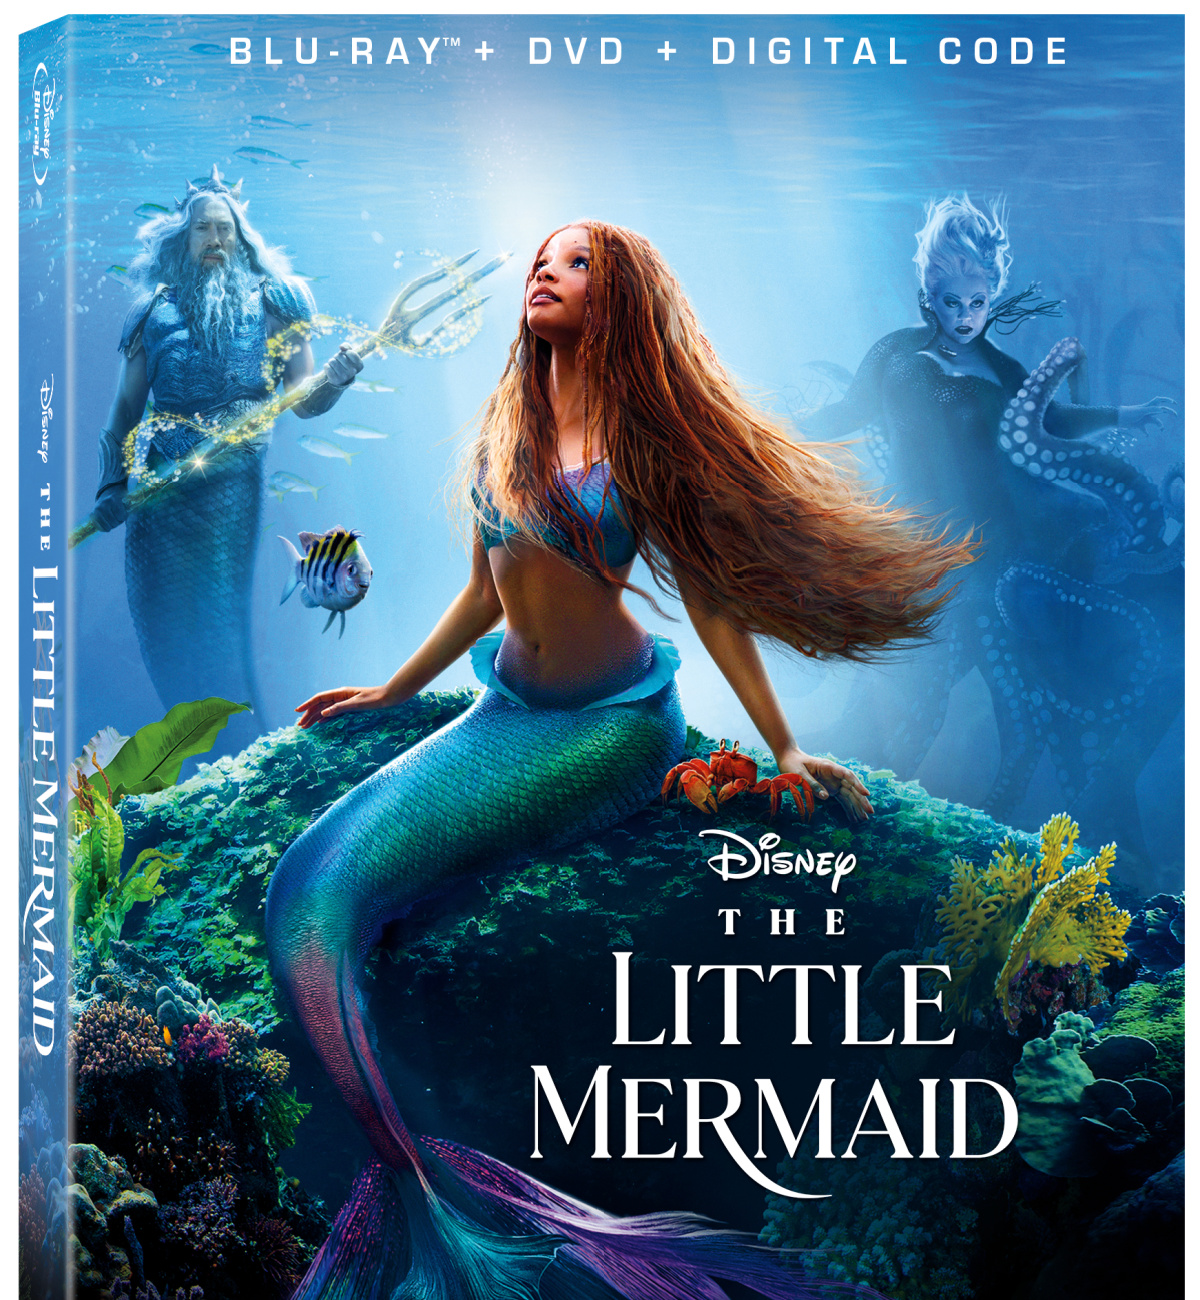 'The Little Mermaid' is available on Digital now, and will be available on 4K, Blu-ray and DVD September 19th.